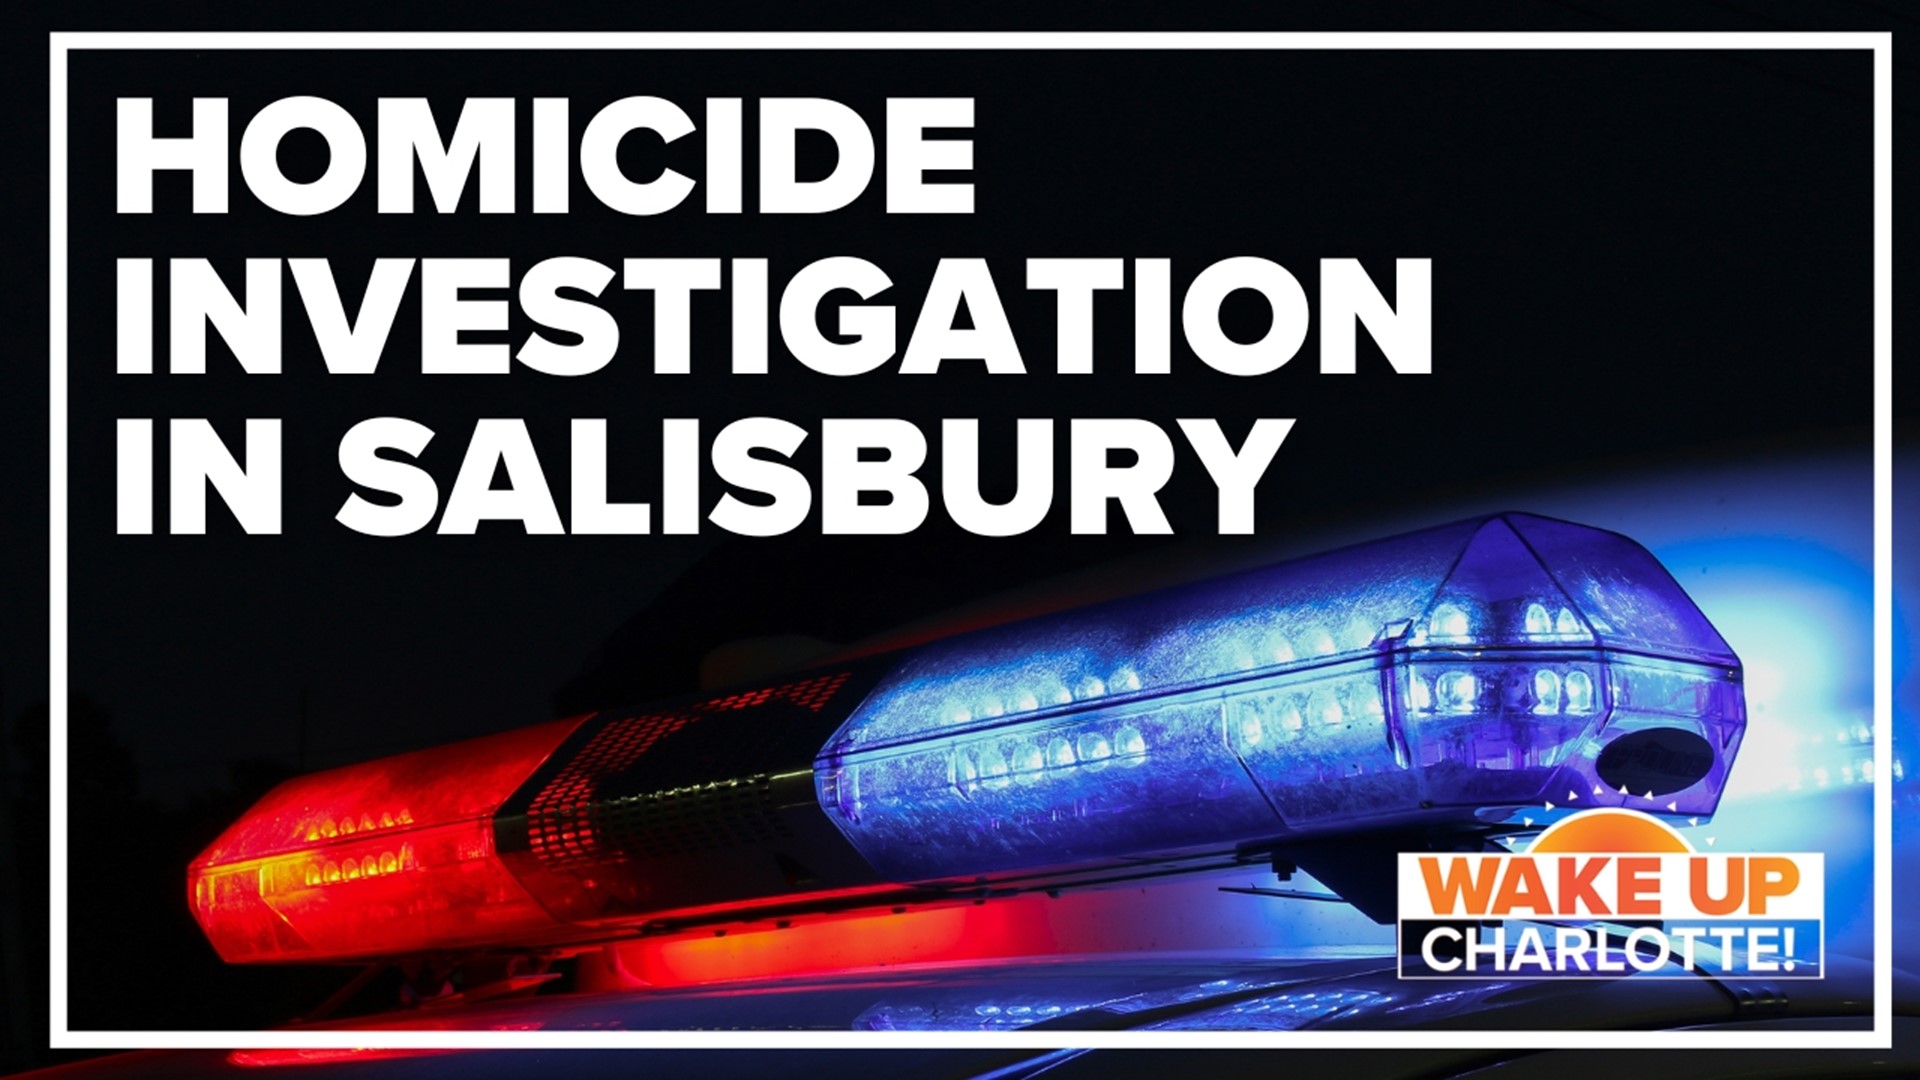 Salisbury police are investigating a homicide in a shopping center on Statesville Blvd.